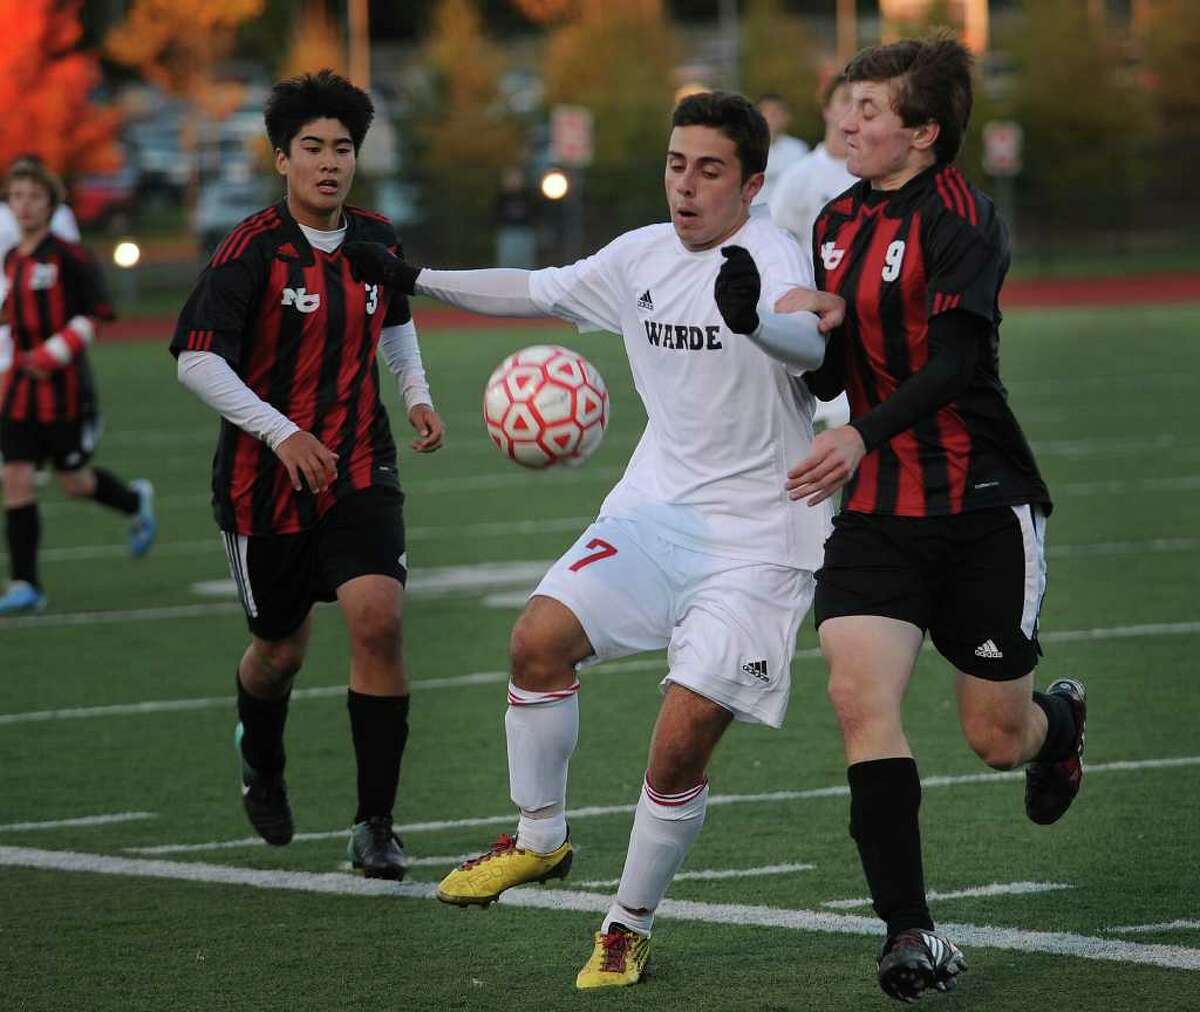 Fairfield Warde's Jason Correia plays the ball between New Canaan defenders Adam Braccio, left, and Jack O'Rourke during the Mustangs' 3-0 victory in the FCIAC boys soccer semifinals at Fairfield Ludlowe High School on Monday, November 1, 2010.